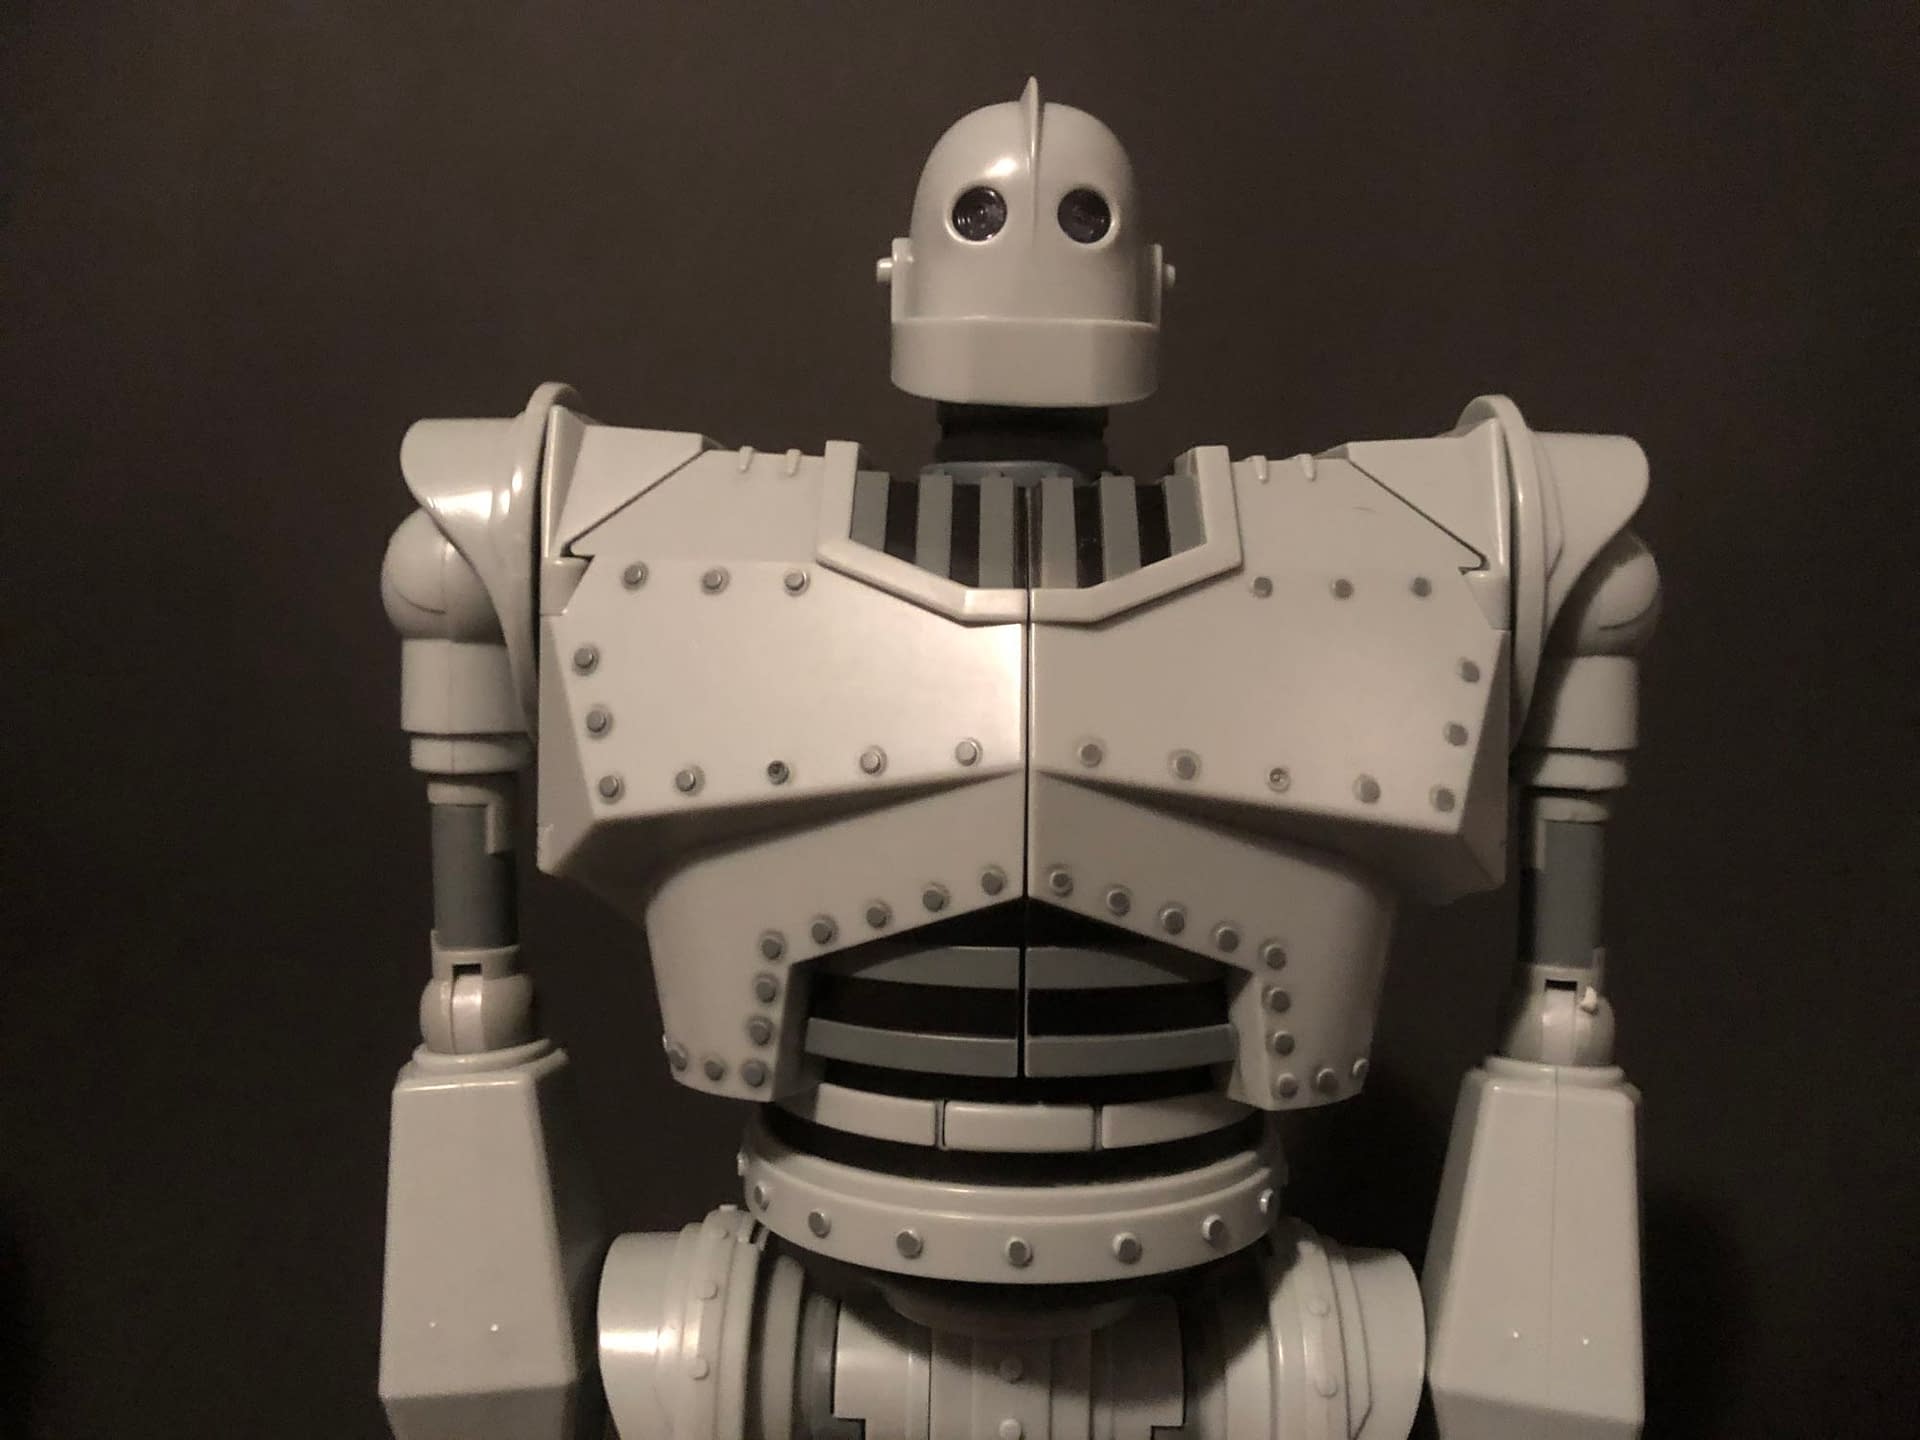 "The Iron Giant" Stands Tall With New Walmart Exclusive Goldlok Figure